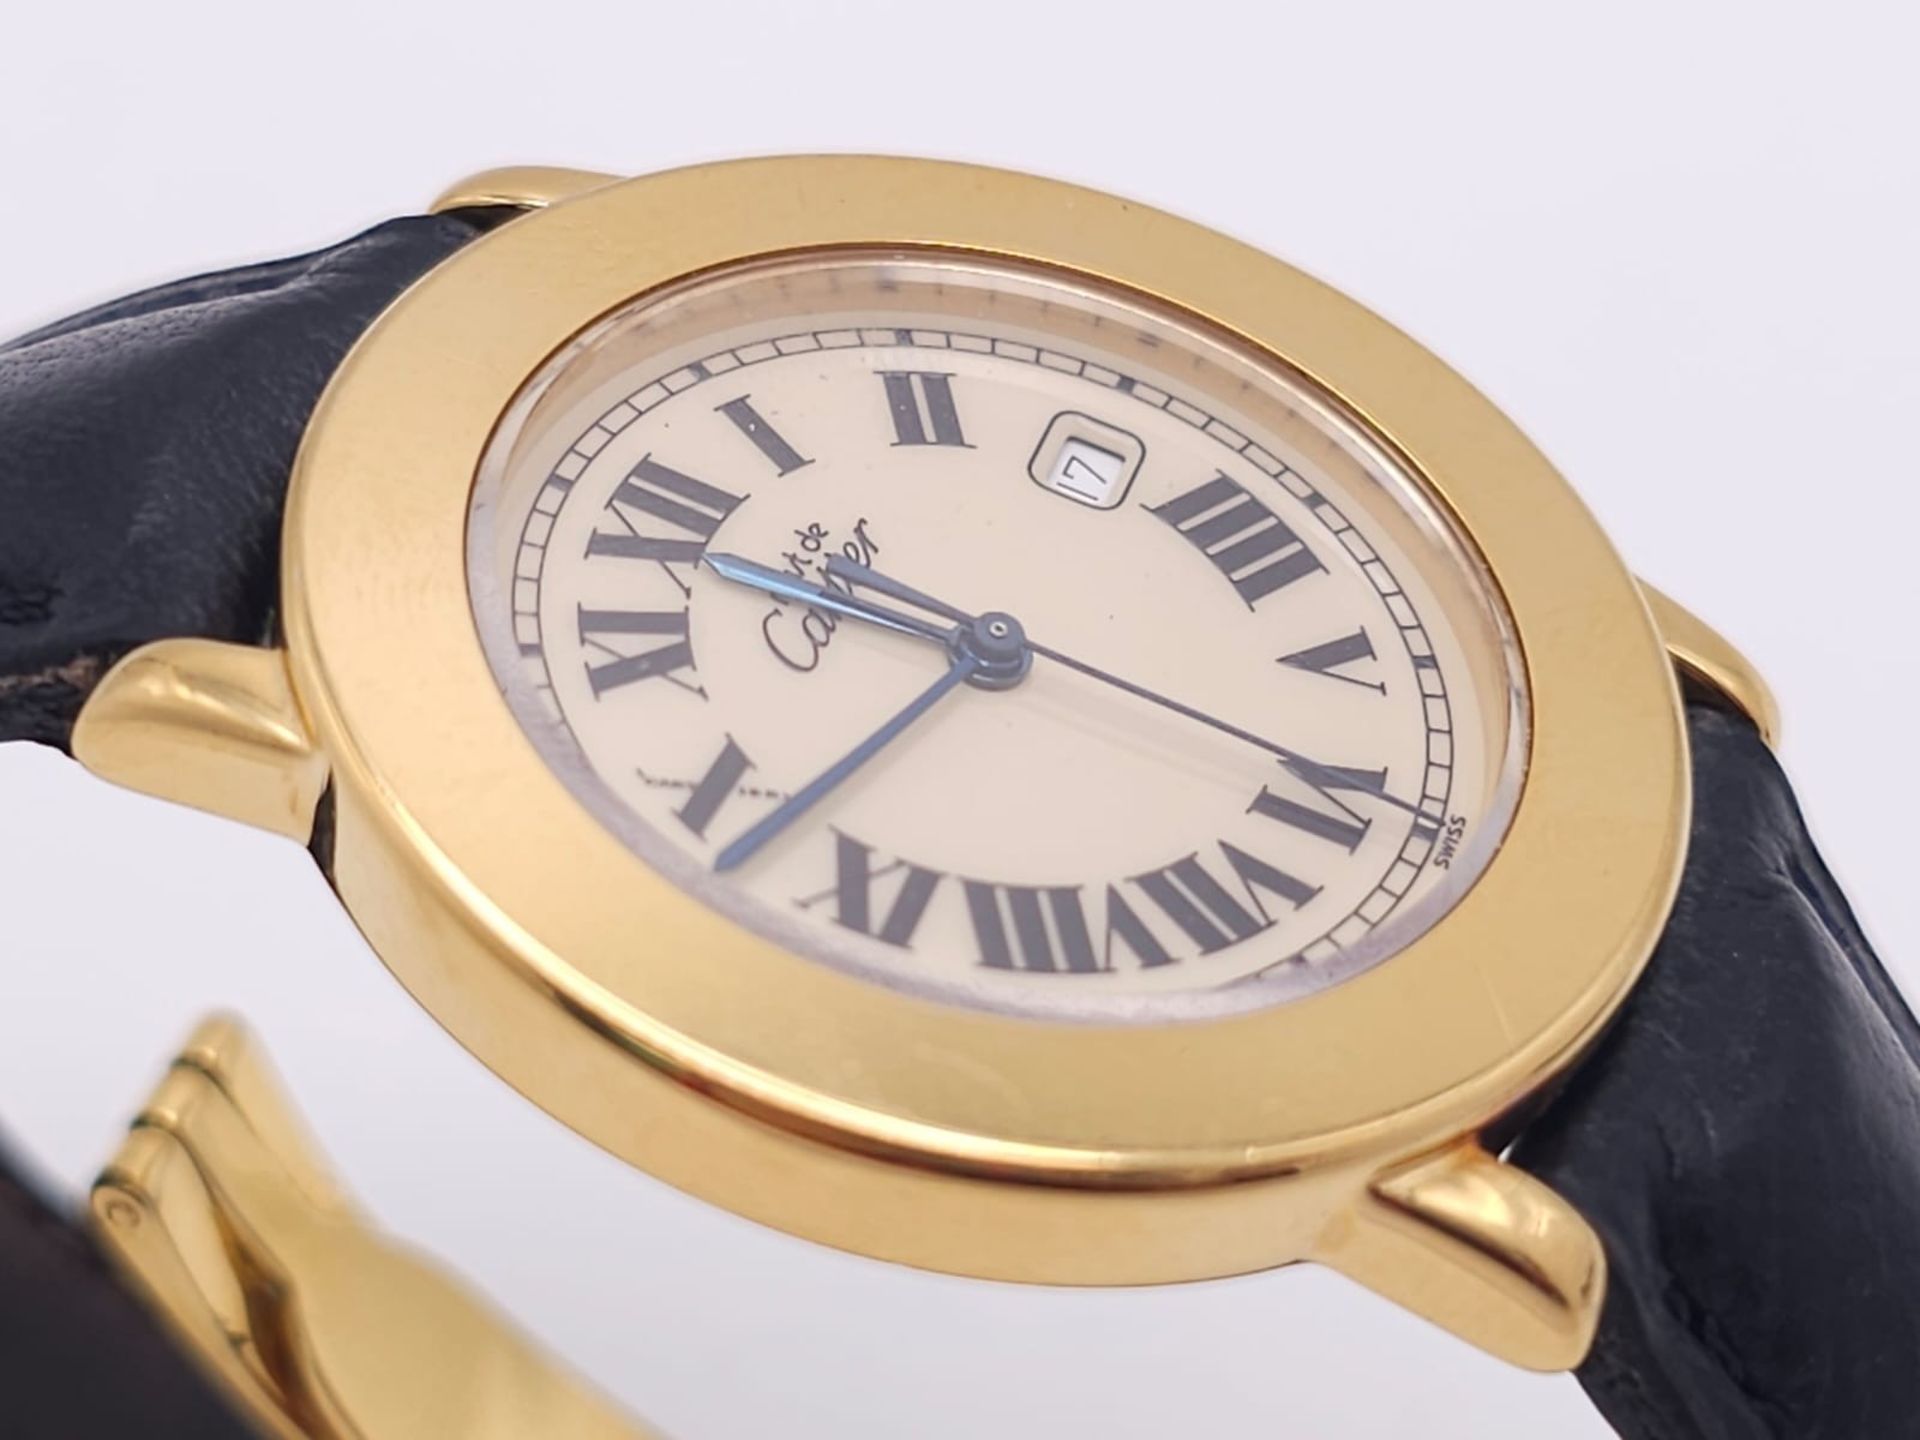 A Must De Cartier Gold Plated Silver Quartz Ladies Watch. Black leather strap. Gold plated silver - Image 4 of 11